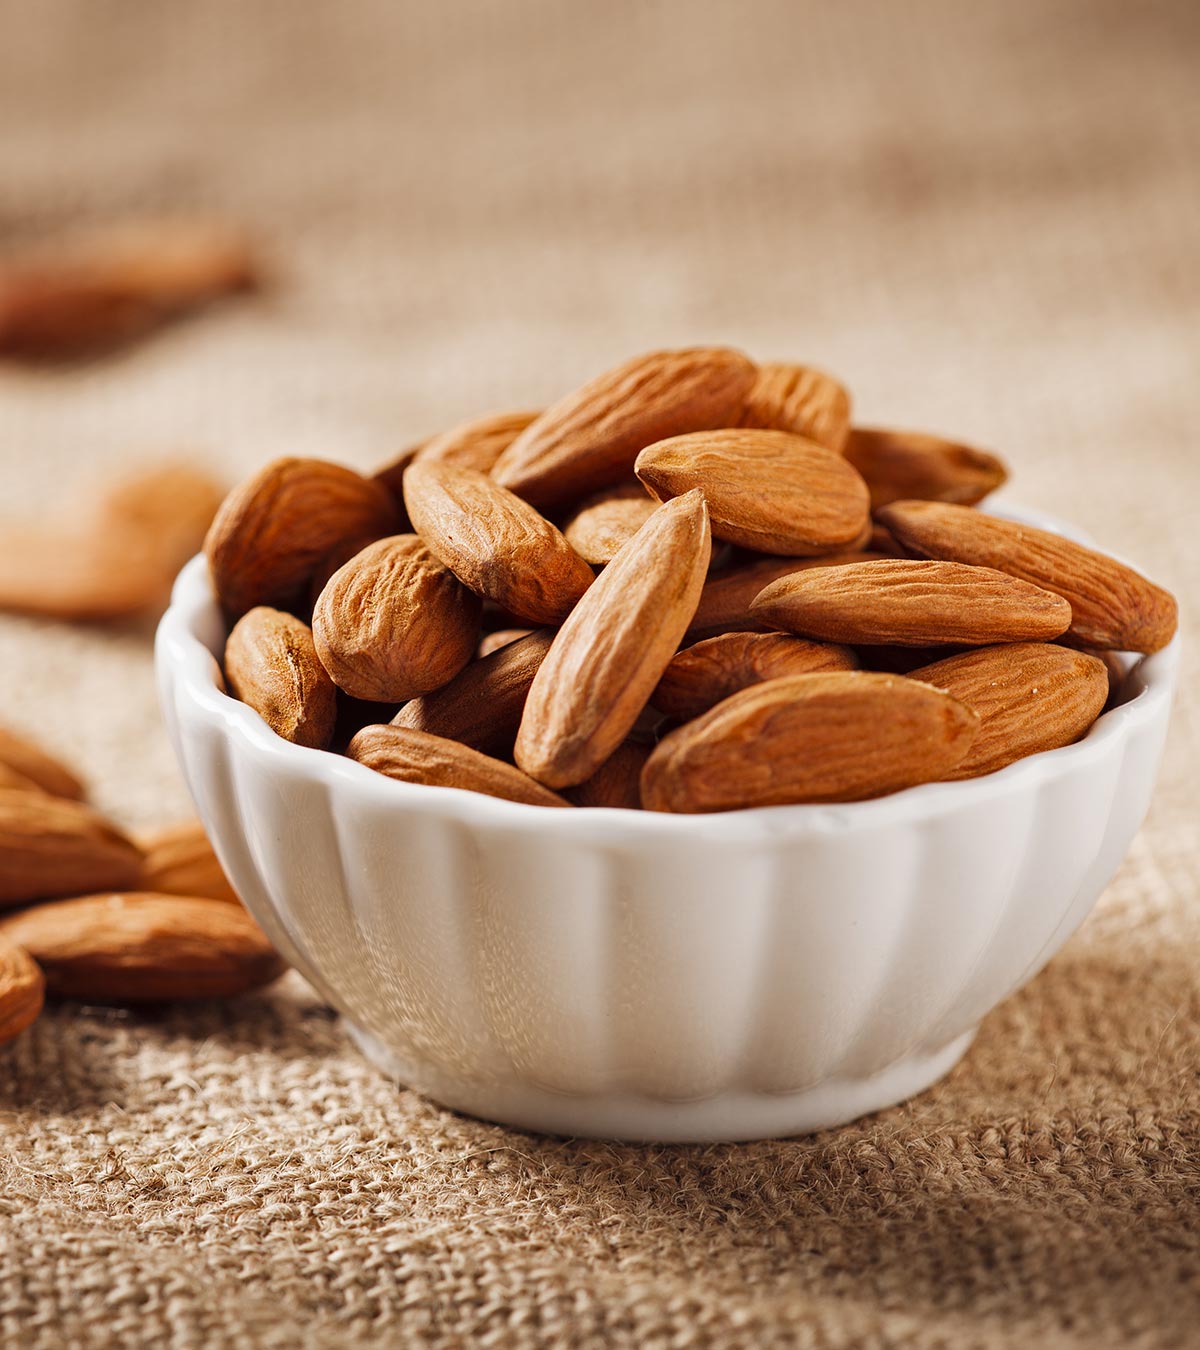 6 Health Benefits Of Eating Almonds While Breastfeeding